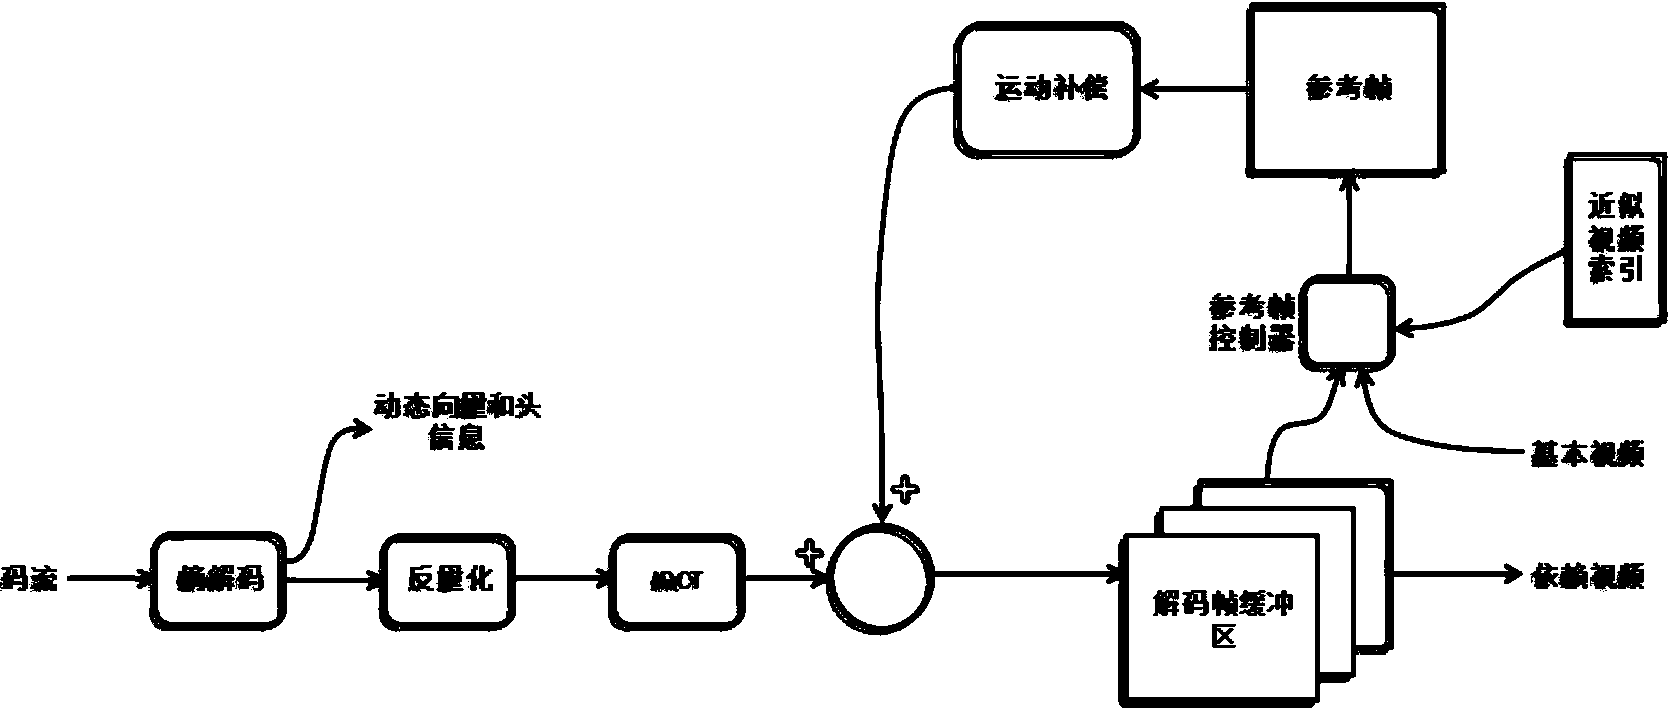 Approximate video encoding system